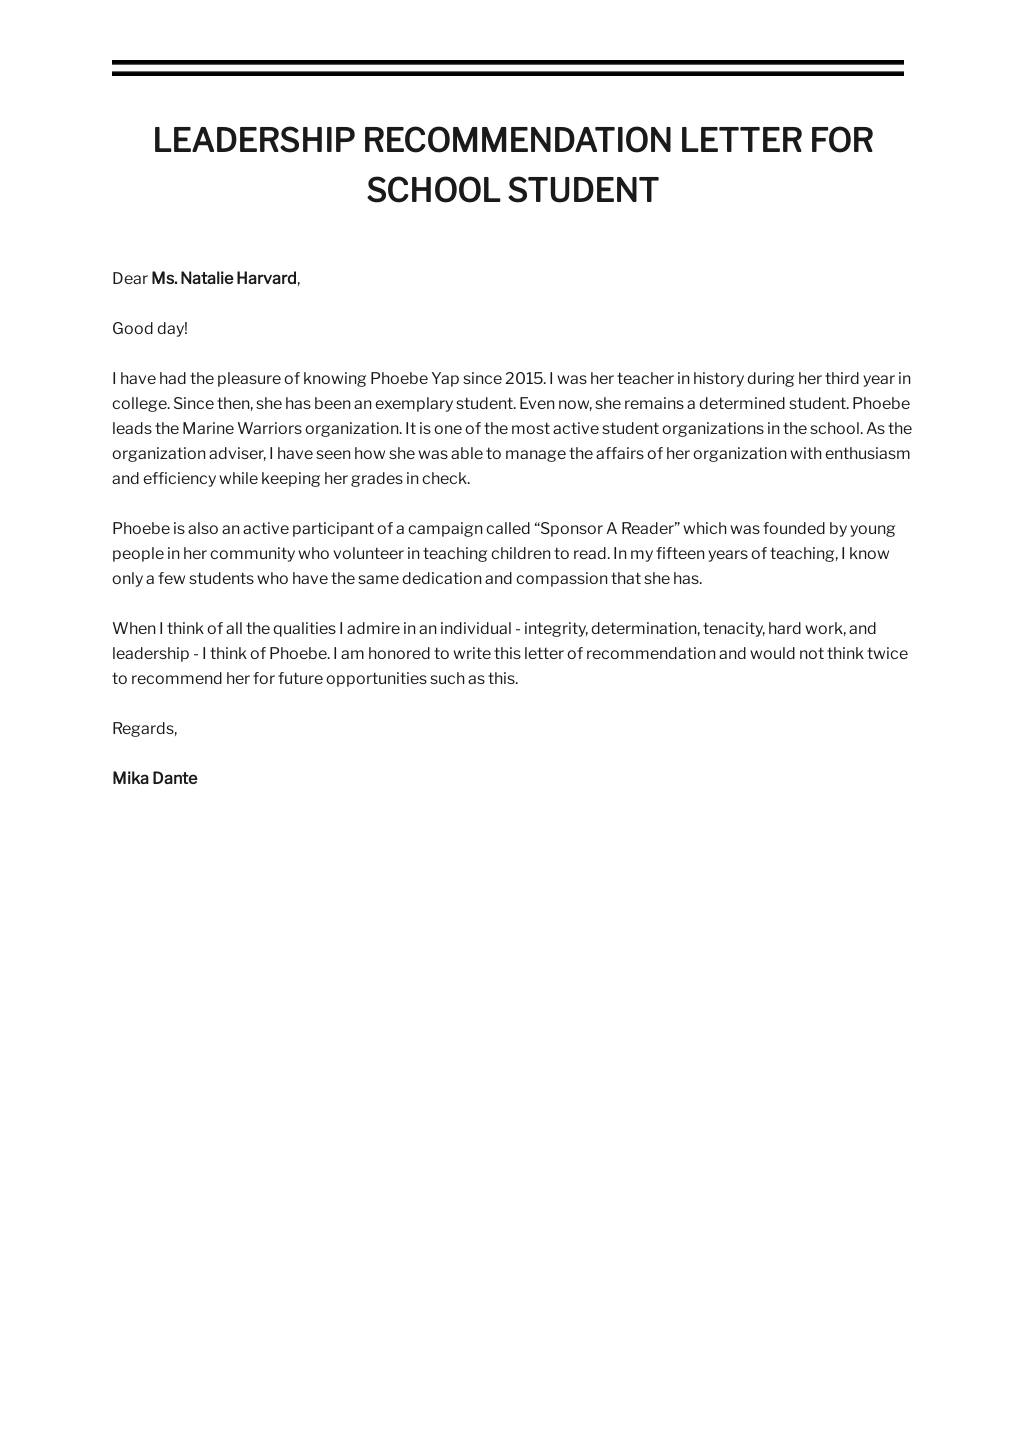 Free Leadership Recommendation Letter for School Student Template - Google Docs, Word, Apple Pages